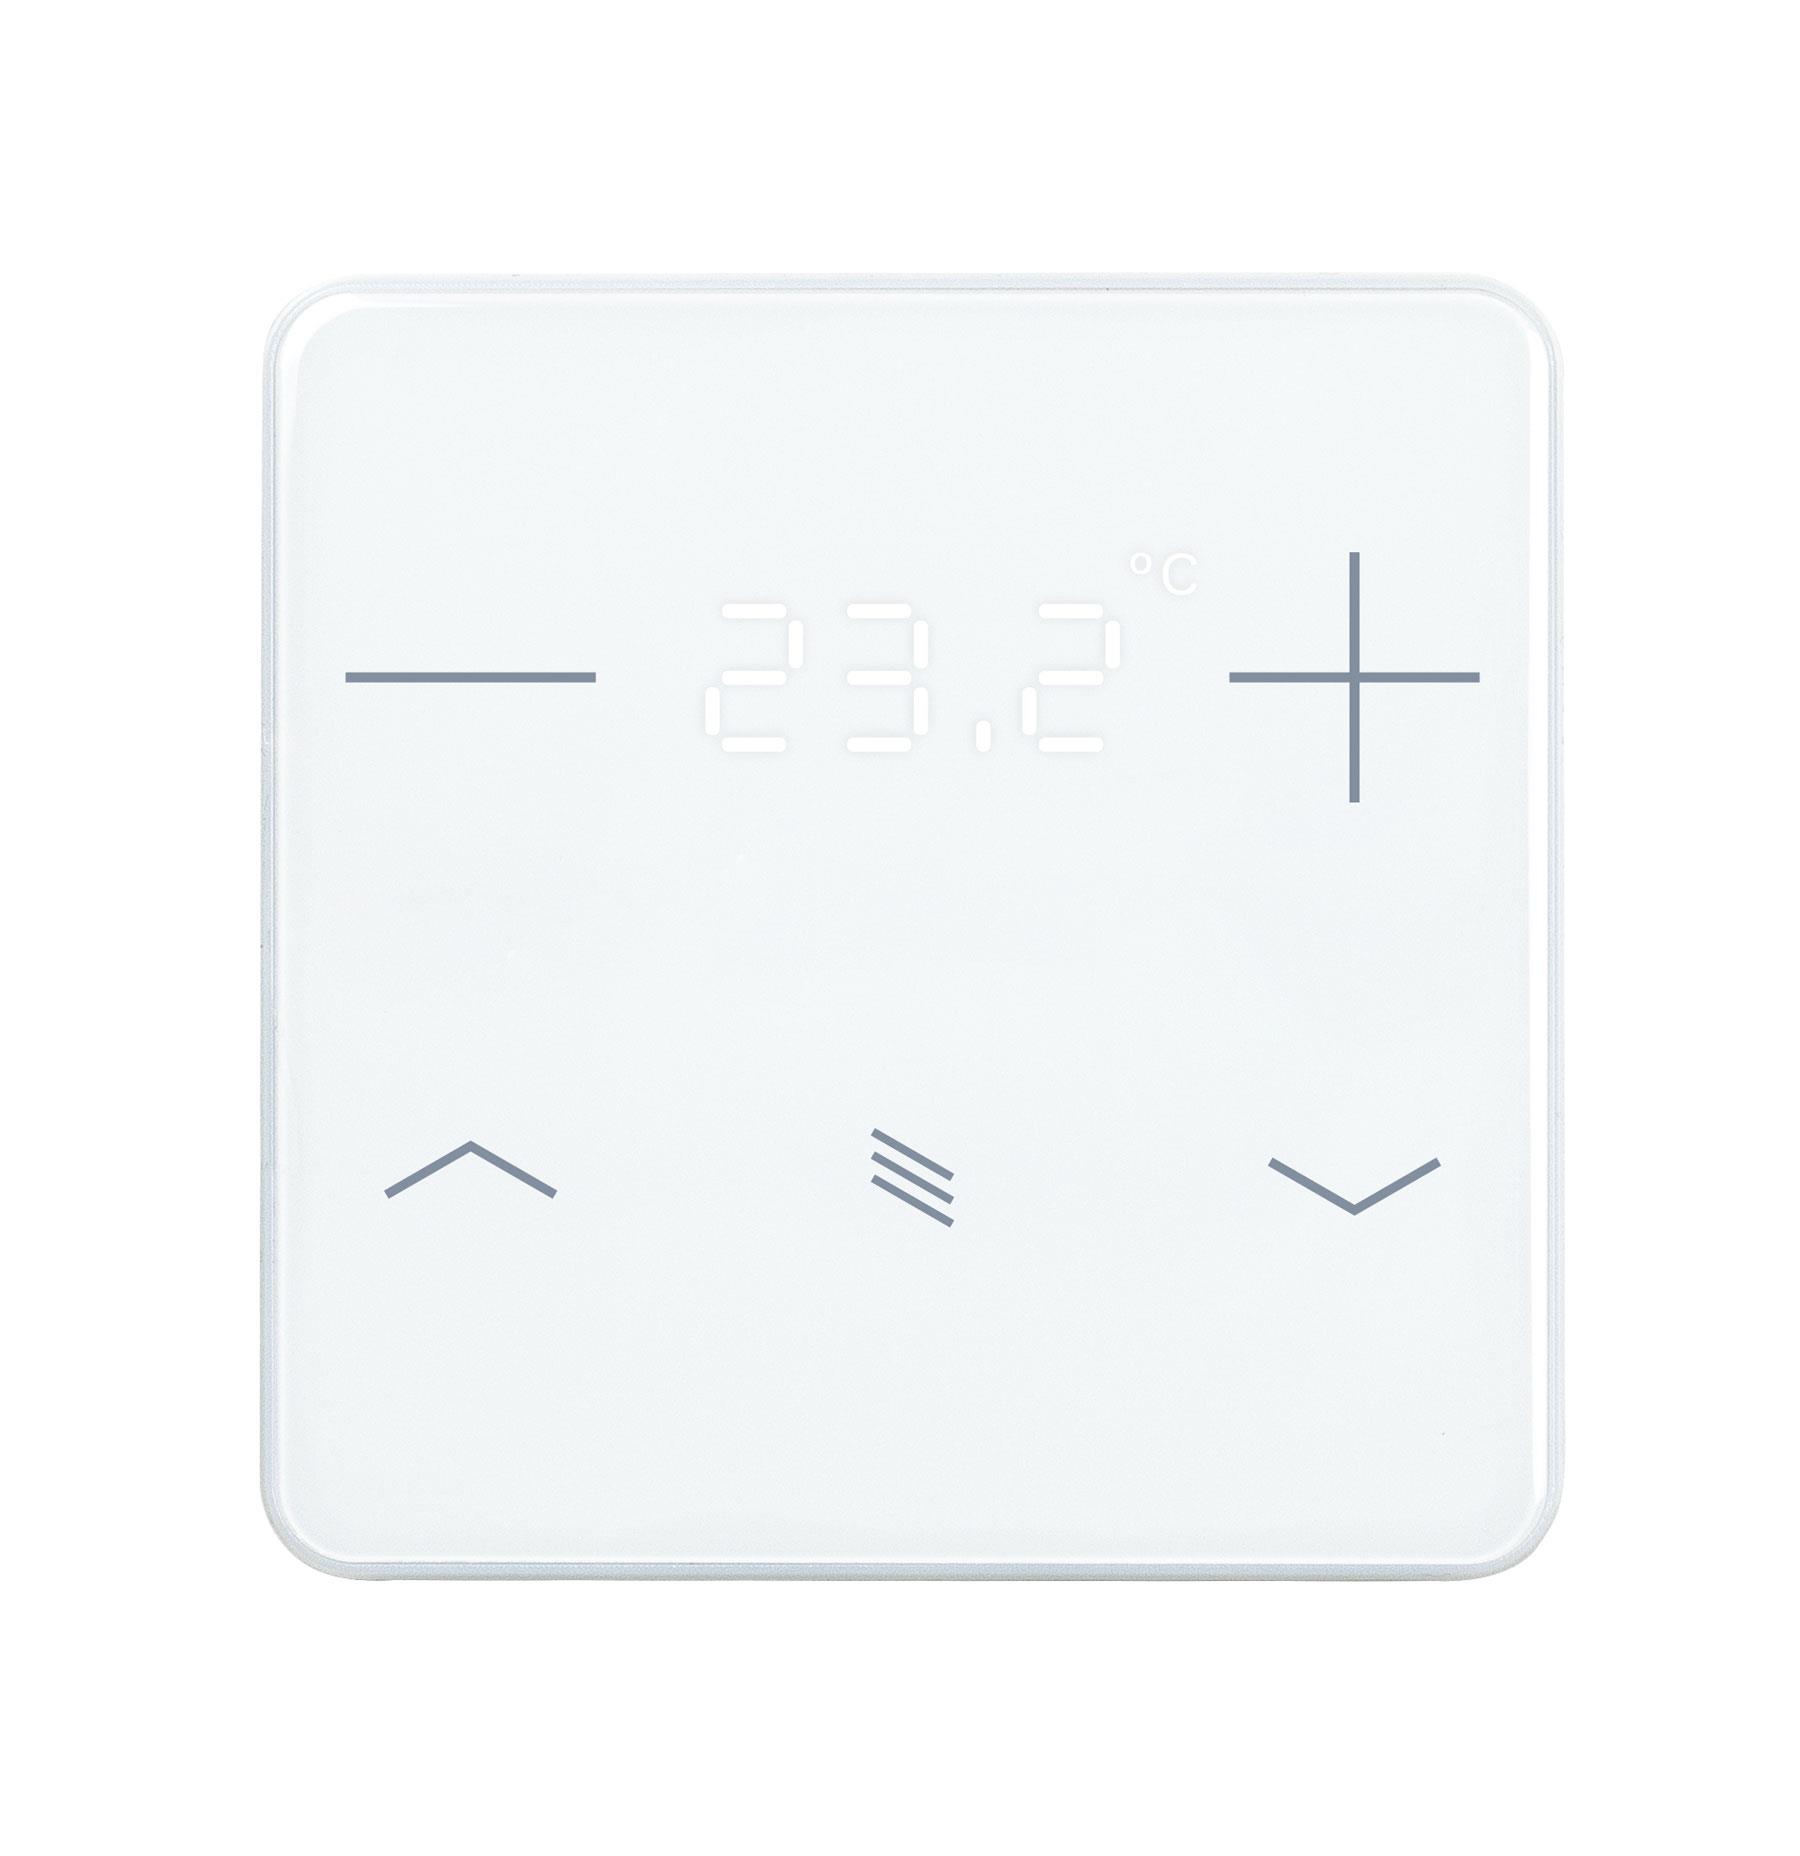 KNX eTR 201 Sunblind Button for Temperature Control, Solar Protection